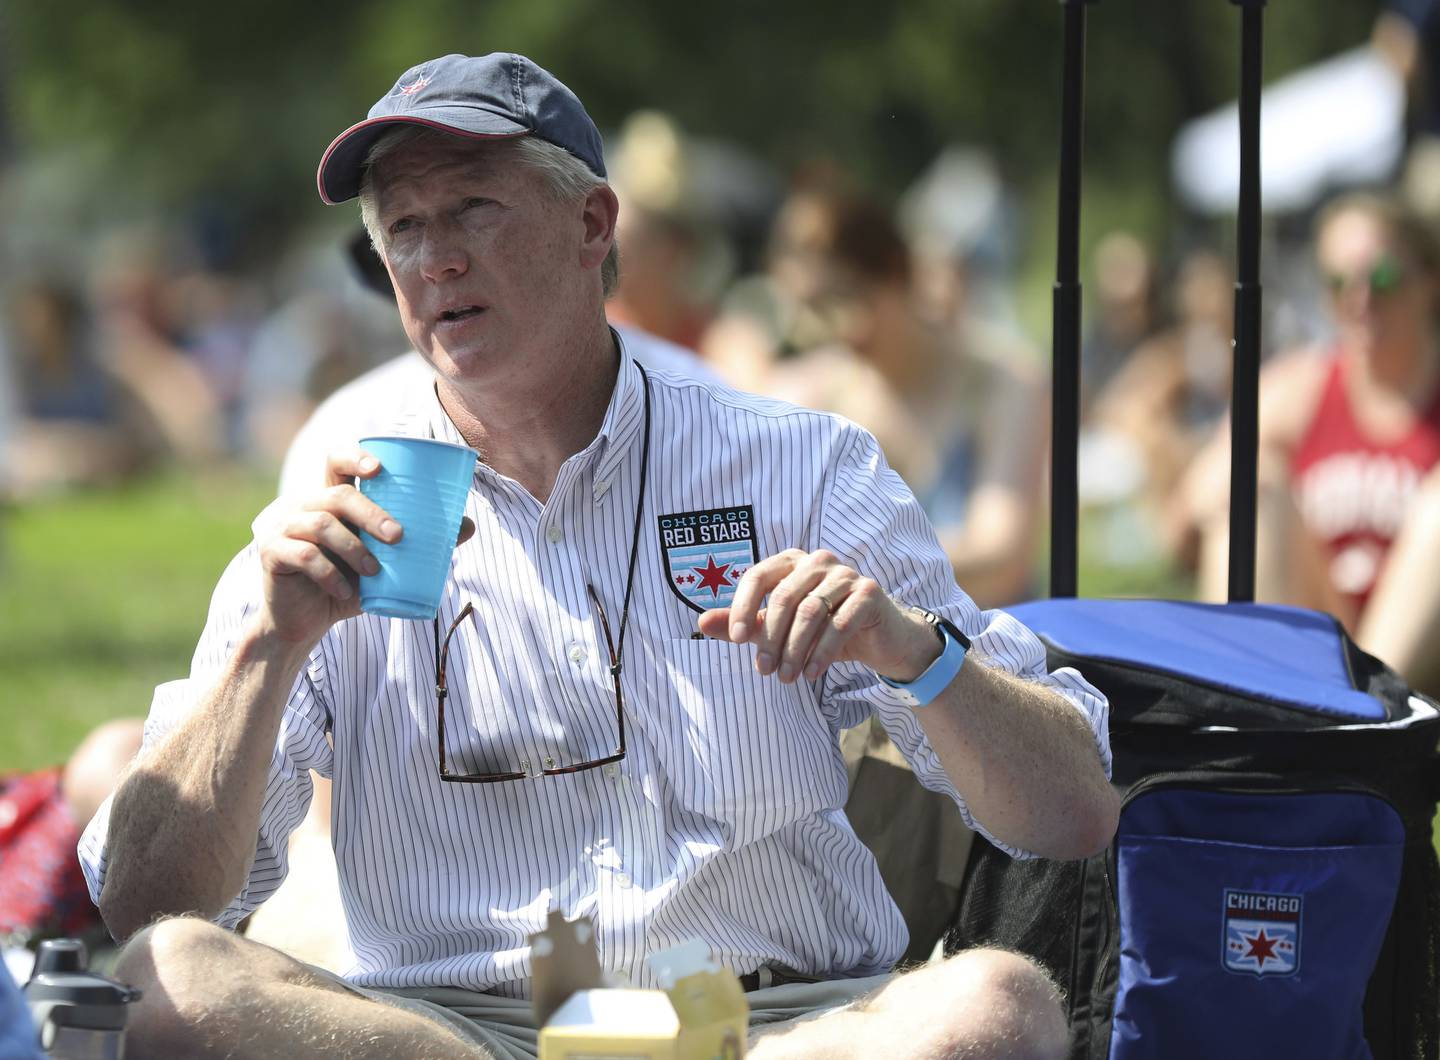 Chicago Red Stars owner Arnim Whisler attends a watch party for the U.S. Women's National during the semifinals of the World Cup at Lincoln Park on July 2, 2019.